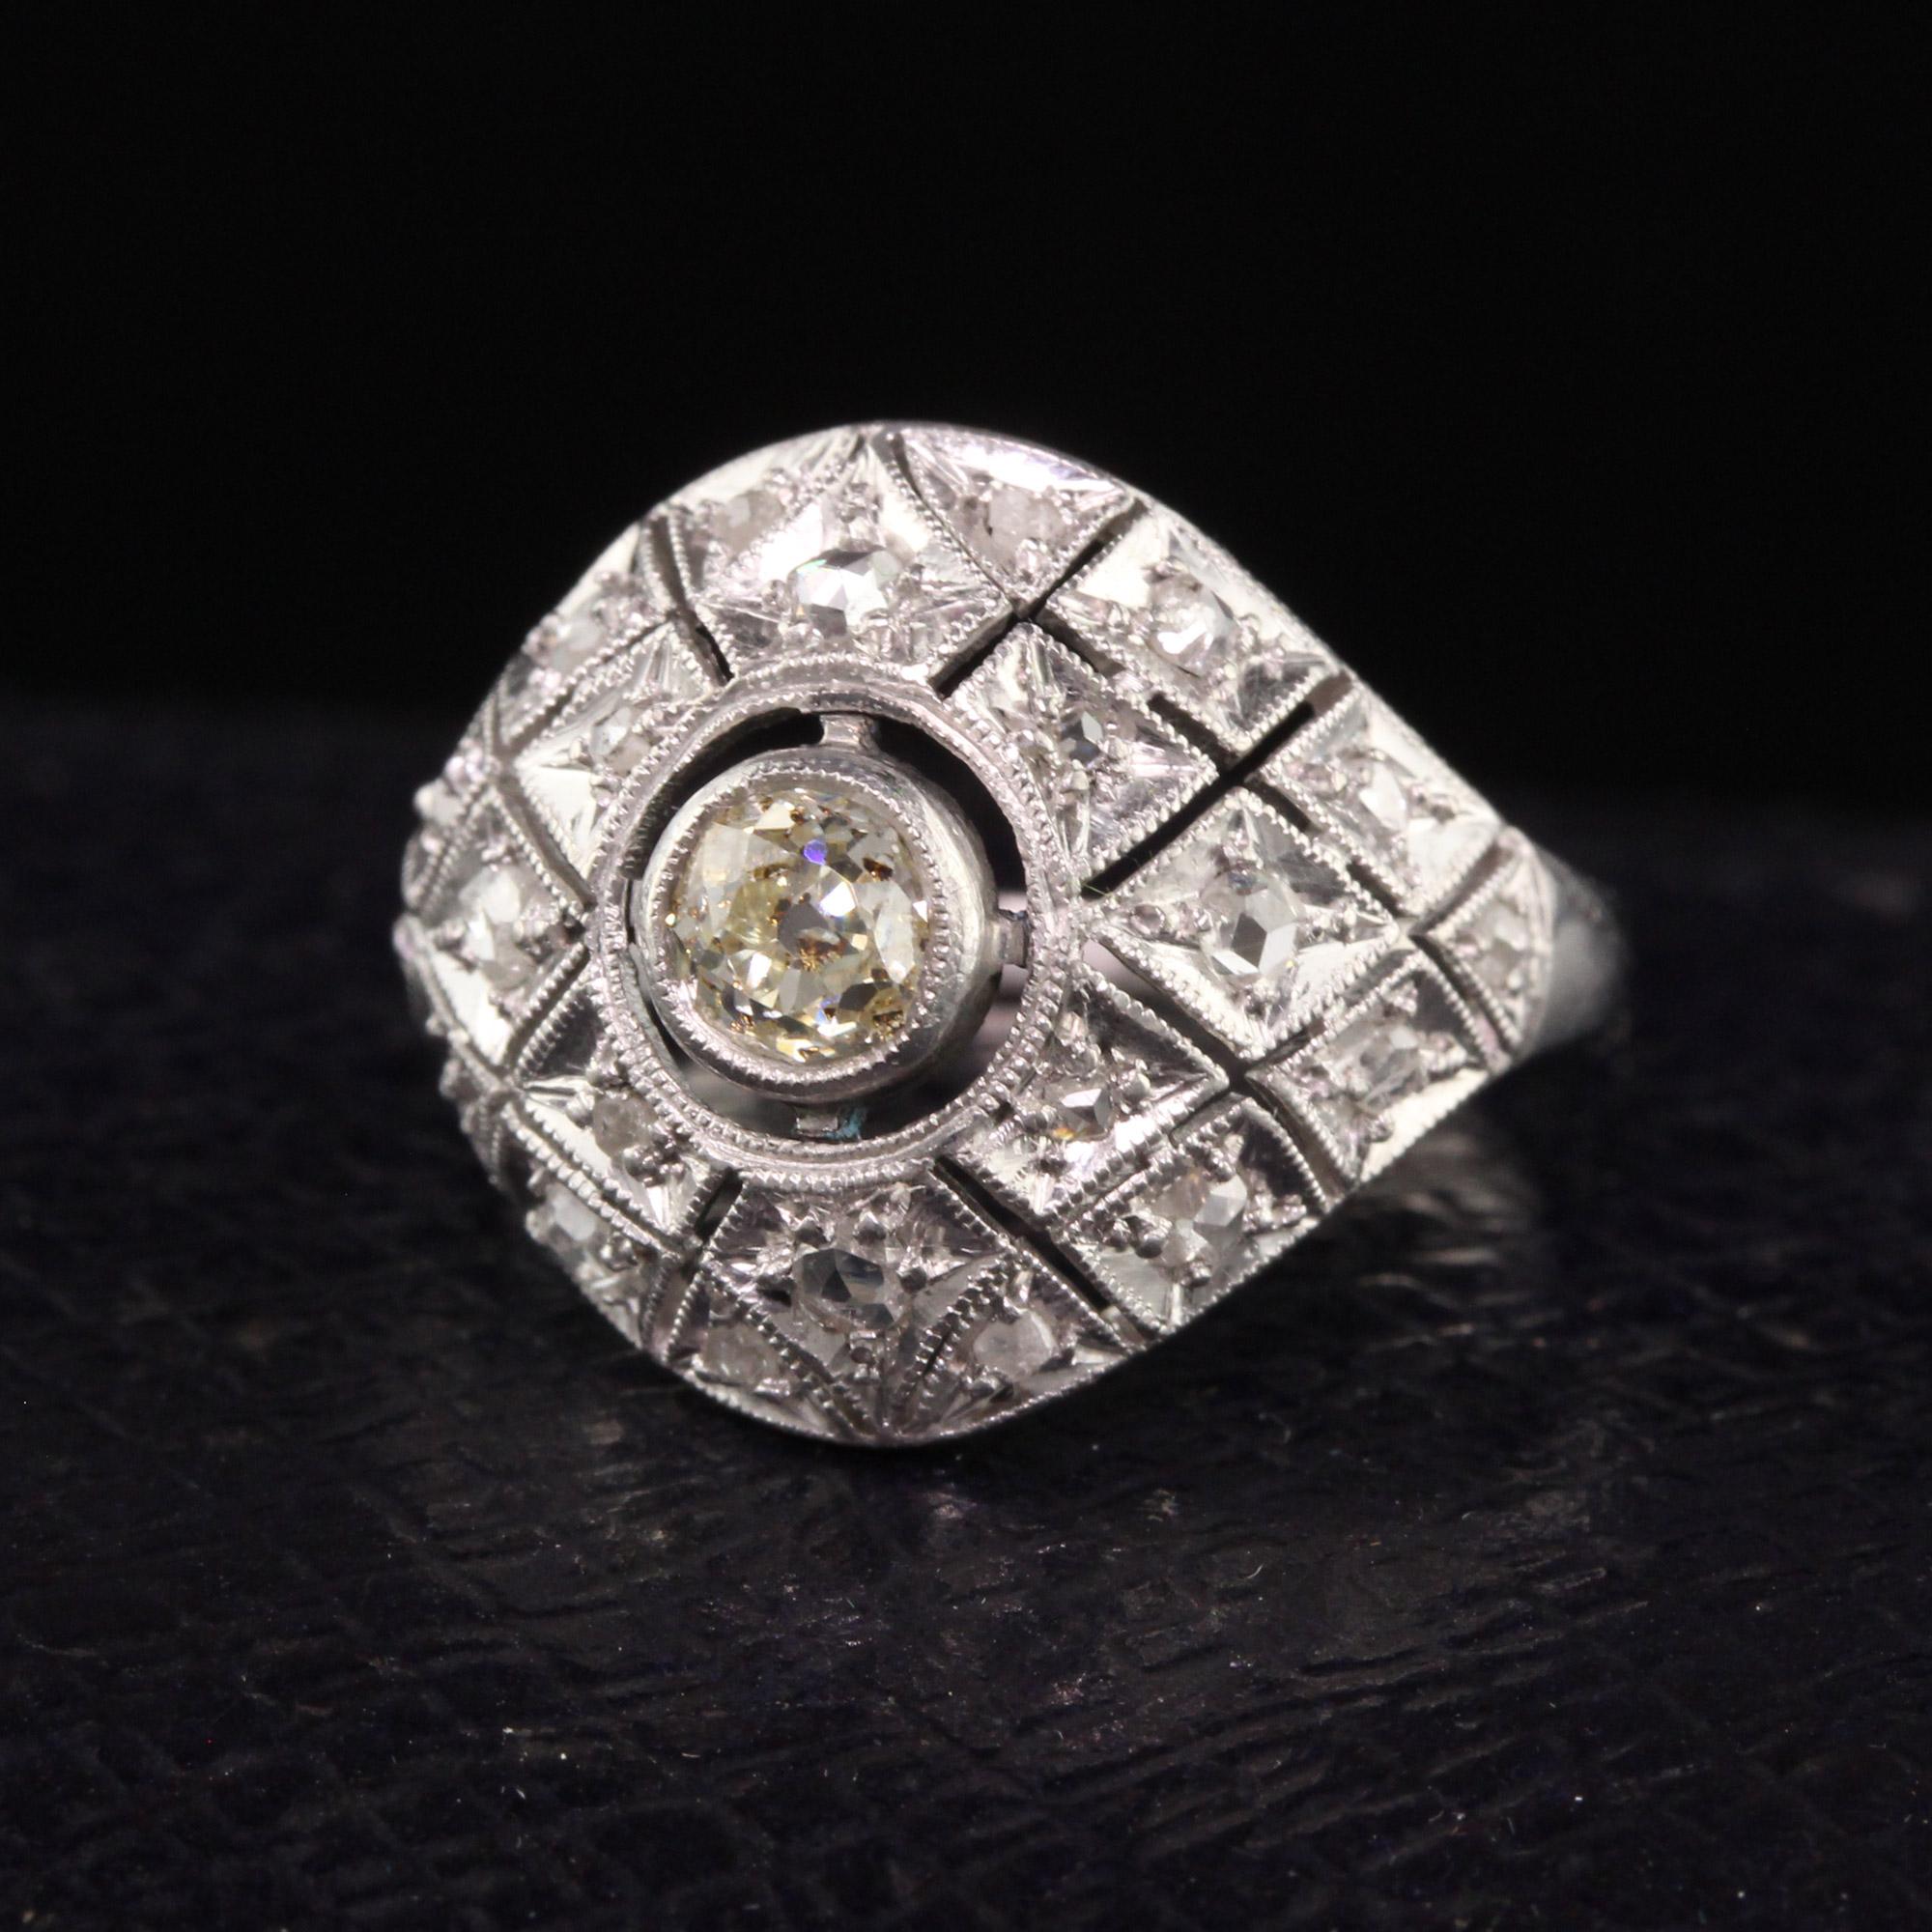 Beautiful Antique Art Deco Platinum Old Mine Diamond Filigree Domed Ring. This gorgeous ring features an old mine cut diamond in the center with rose cut diamonds on the rest of the ring.

Item #R1071

Metal: Platinum

Weight: 4.1 Grams

Size: 5